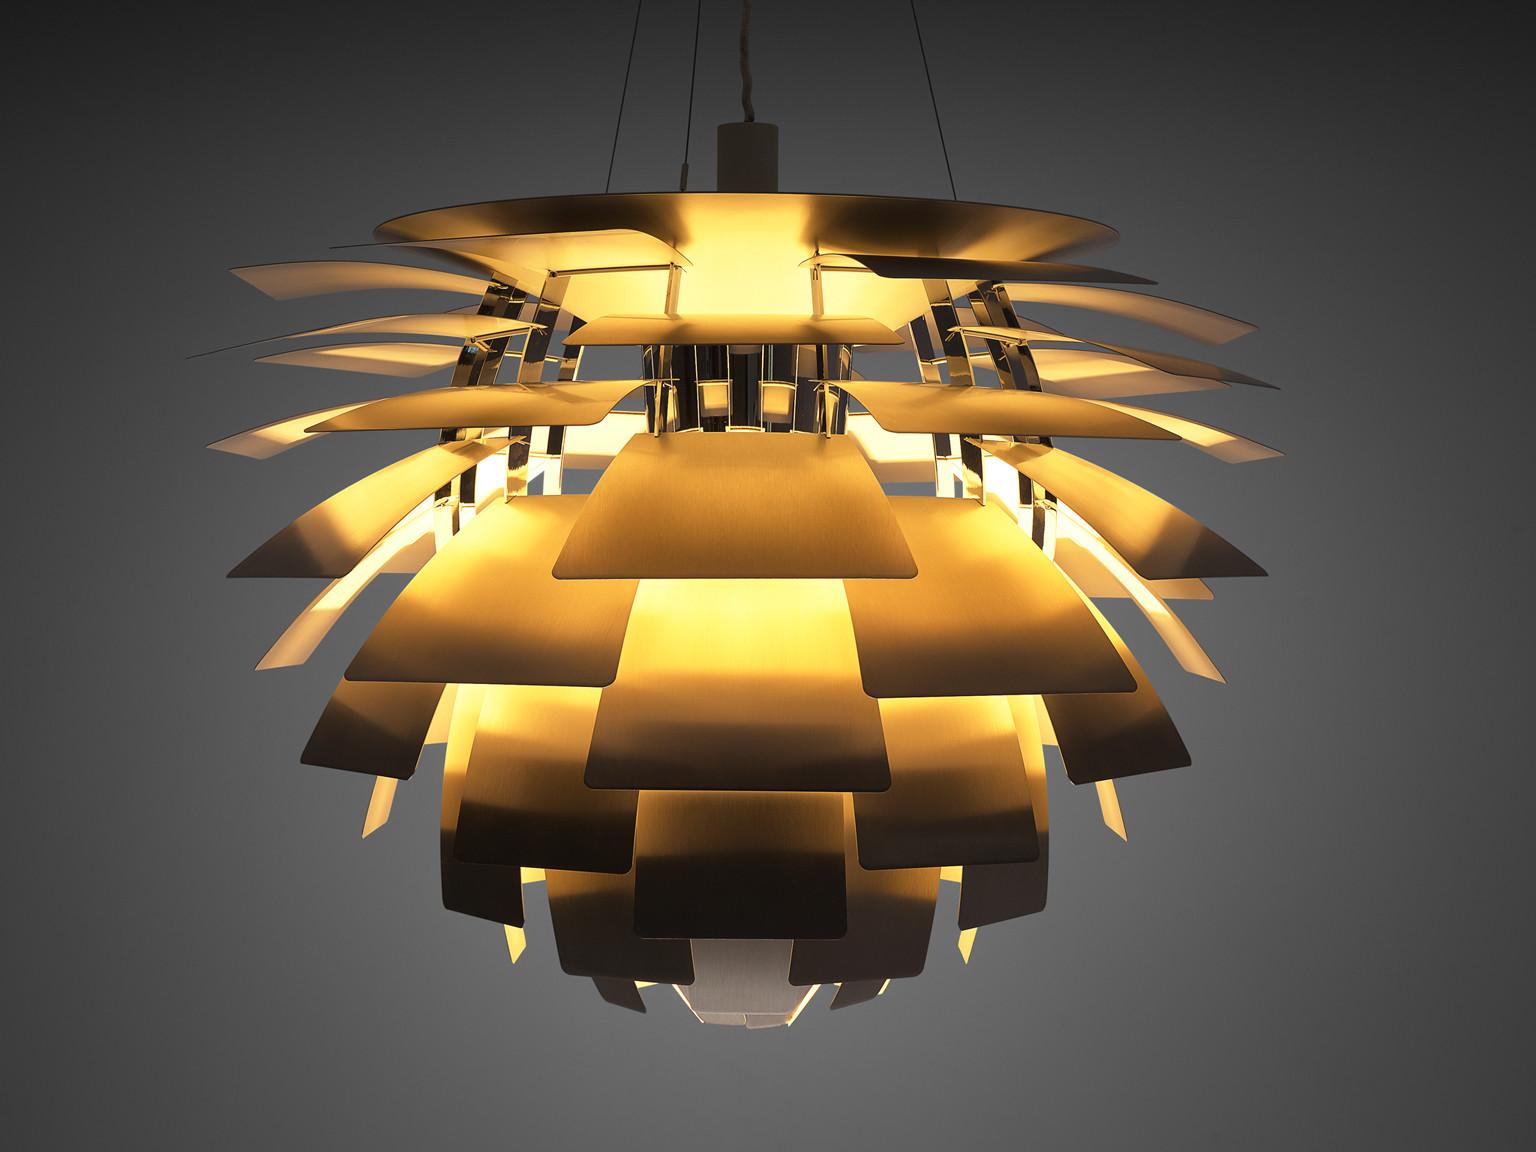 Poul Henningsen for Louis Poulsen, 'PH-Artichoke' pendant with stainless steel shades, stainless steel Denmark, design 1957, production 1970s.

The Artichoke pendant is an all time eyecatcher in the lighting design. This iconic pendant, designed by